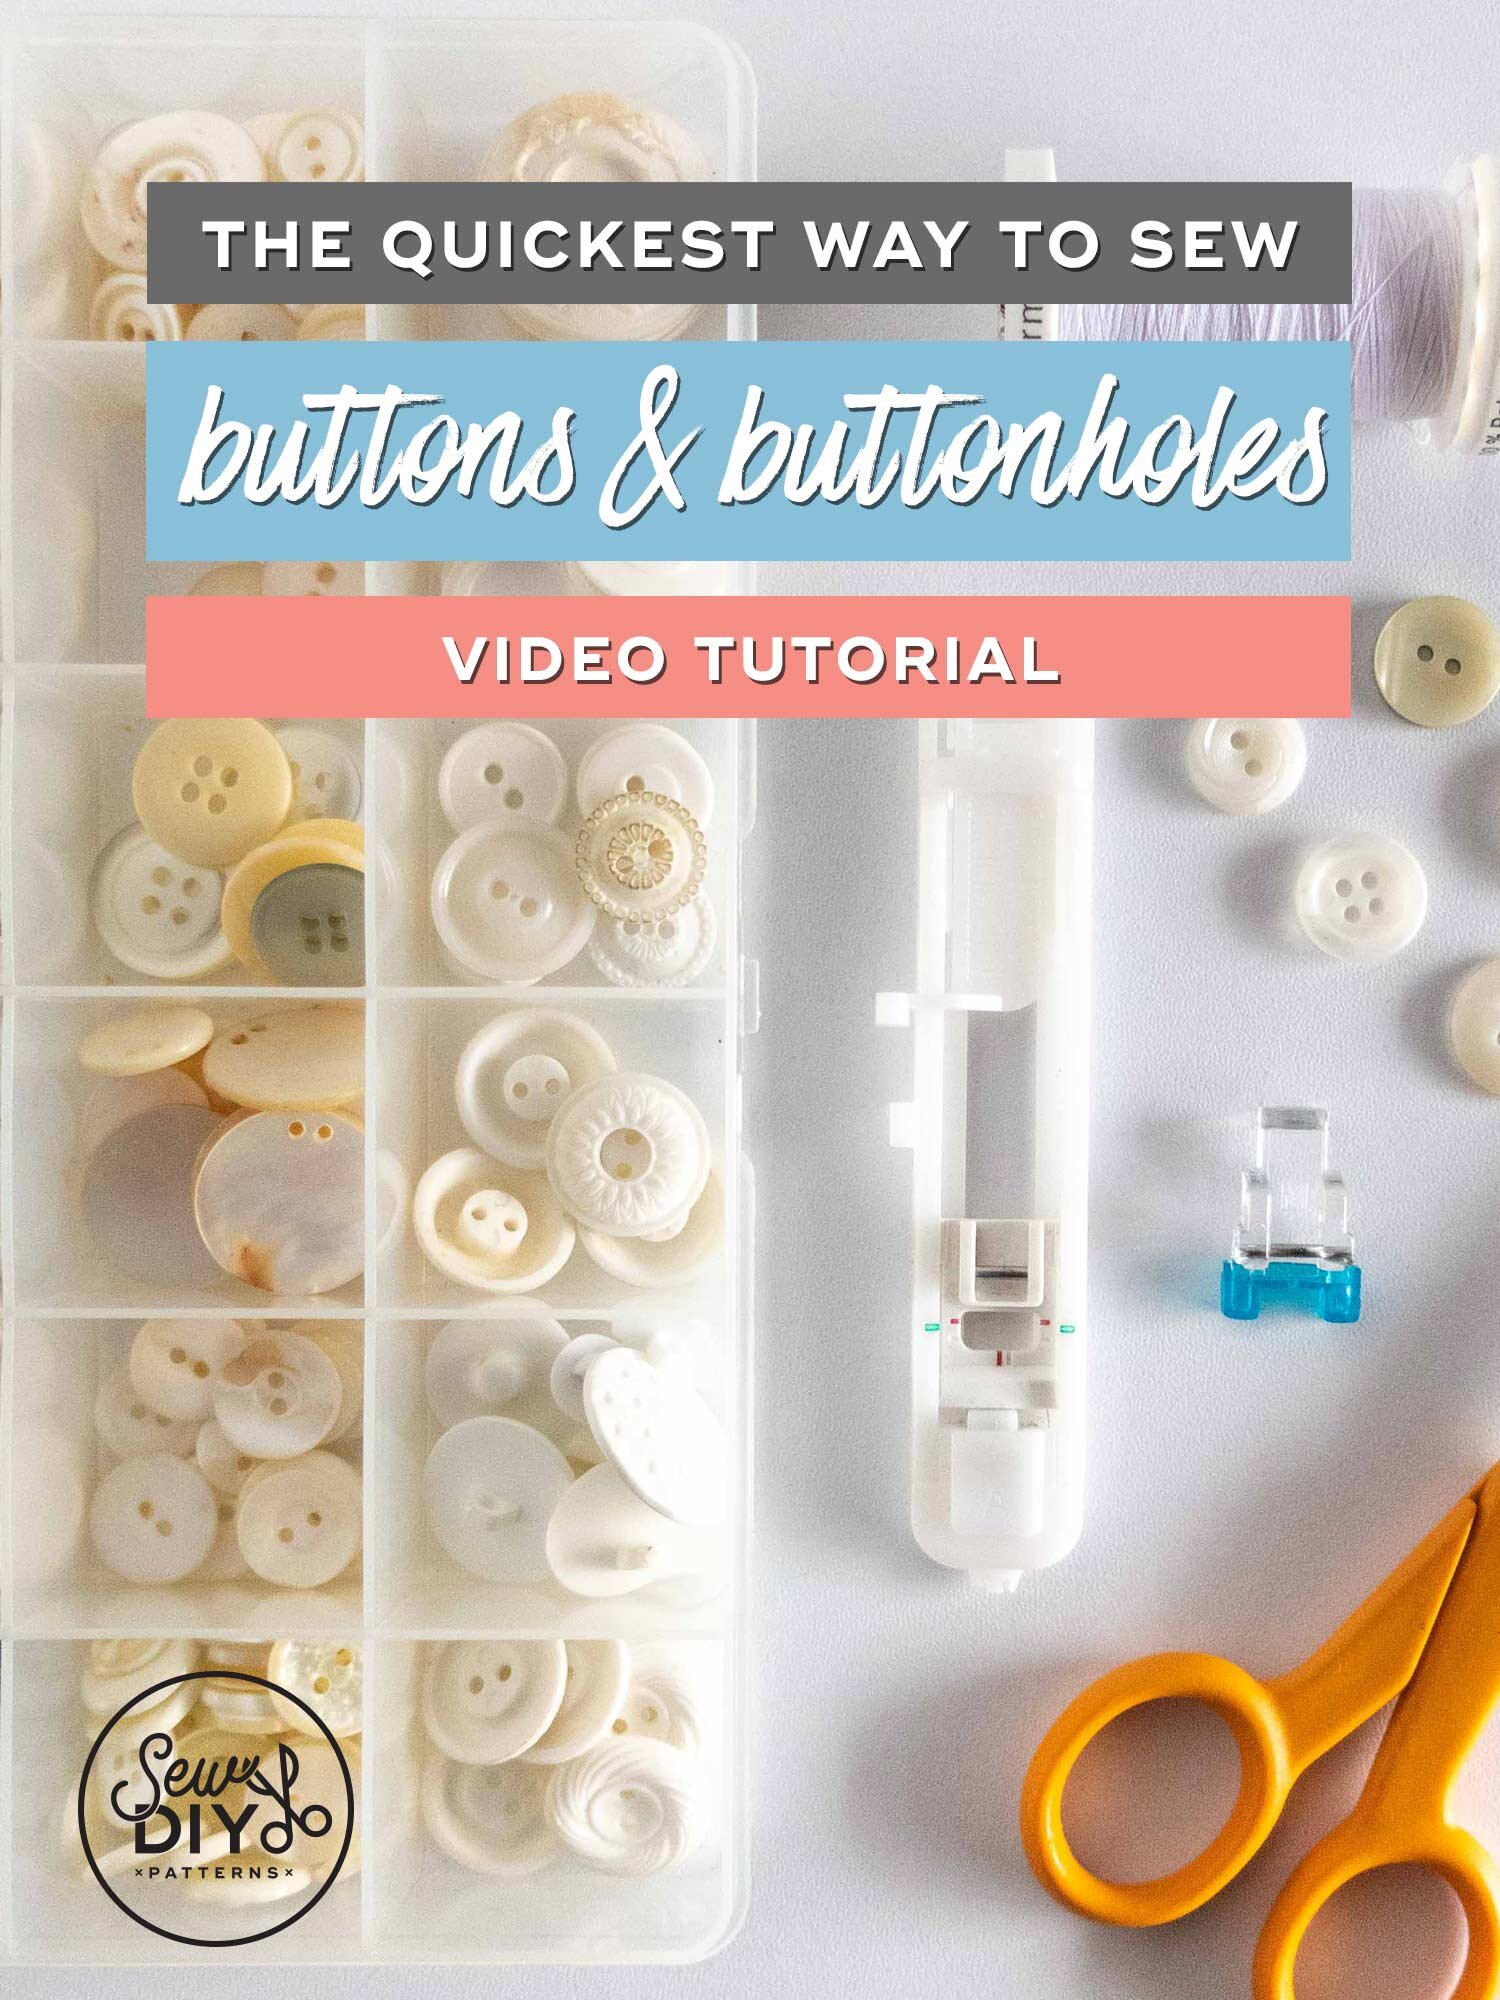 How to sew on a button – simple sewing technique